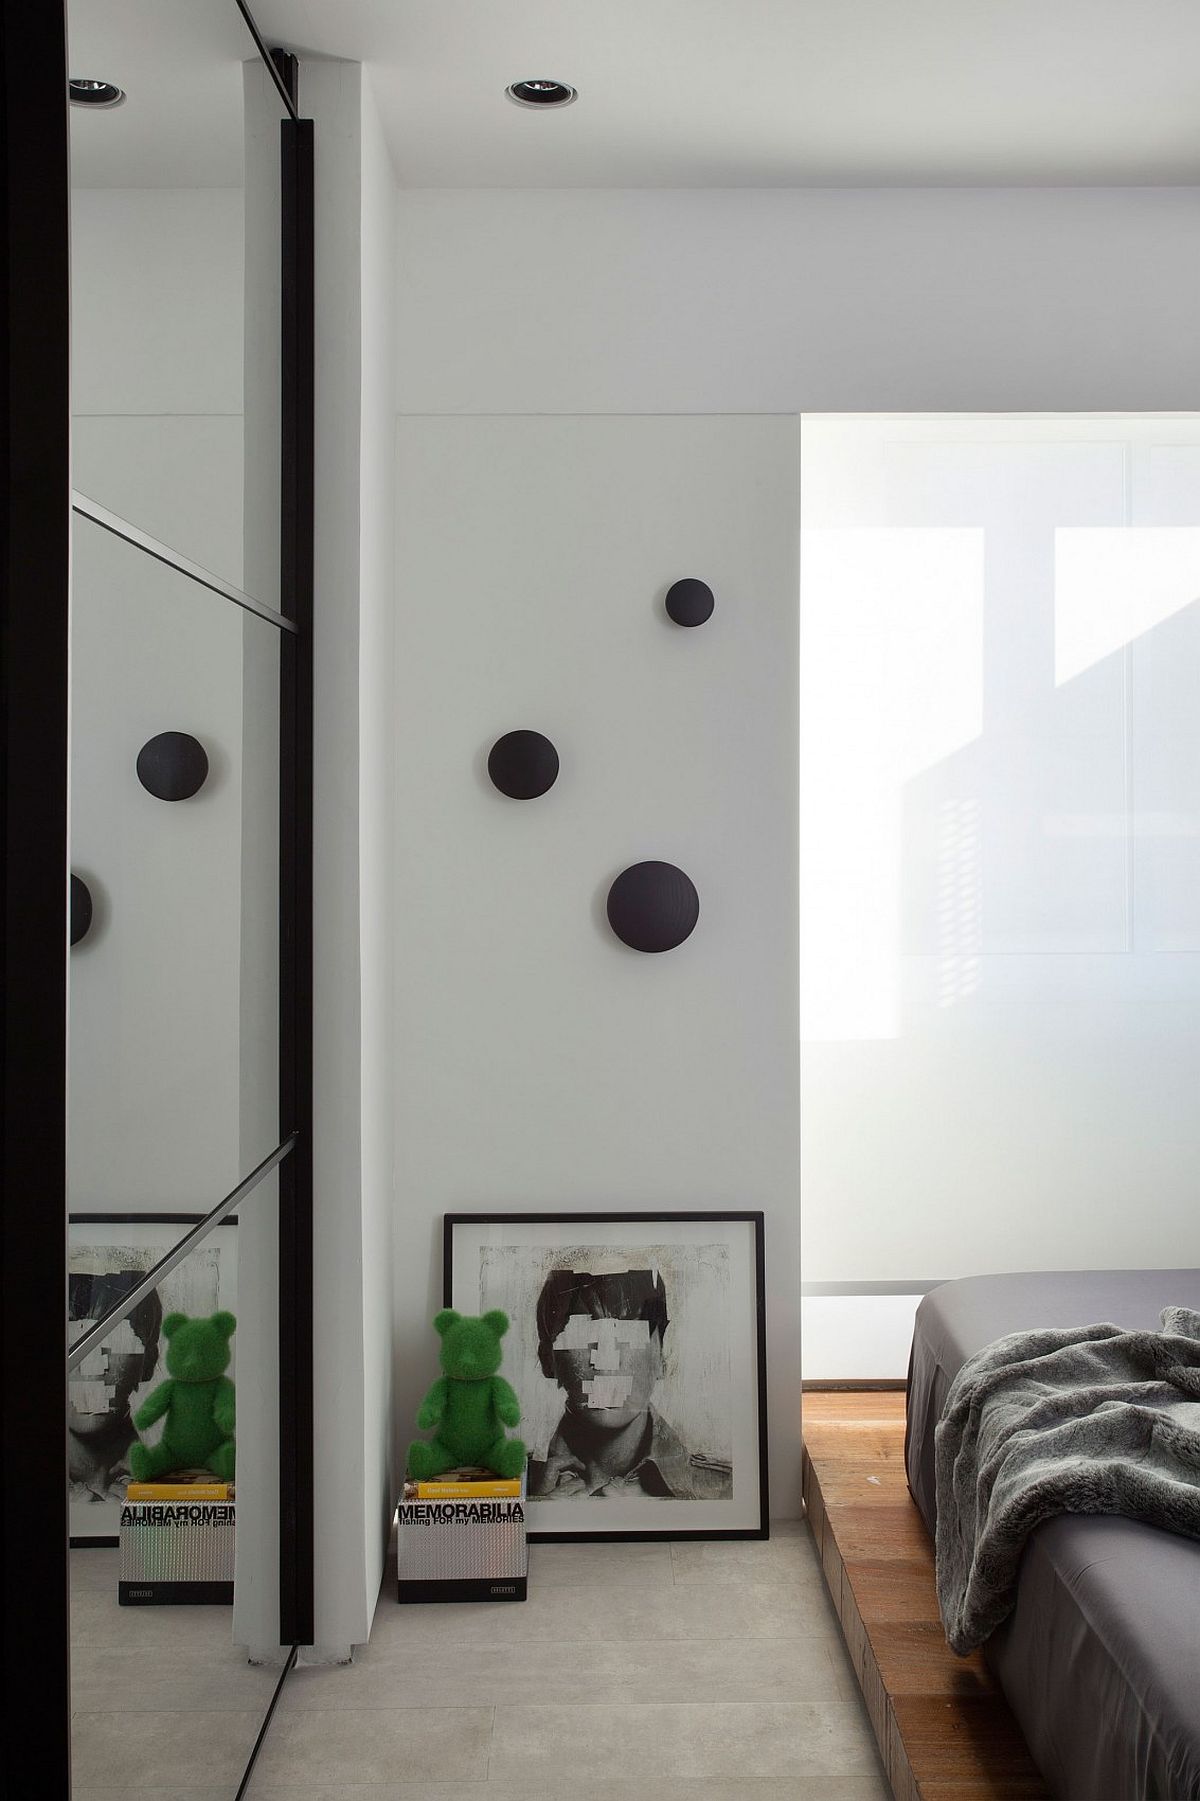 Black, white and gray form the basic color scheme of the minimal bedroom